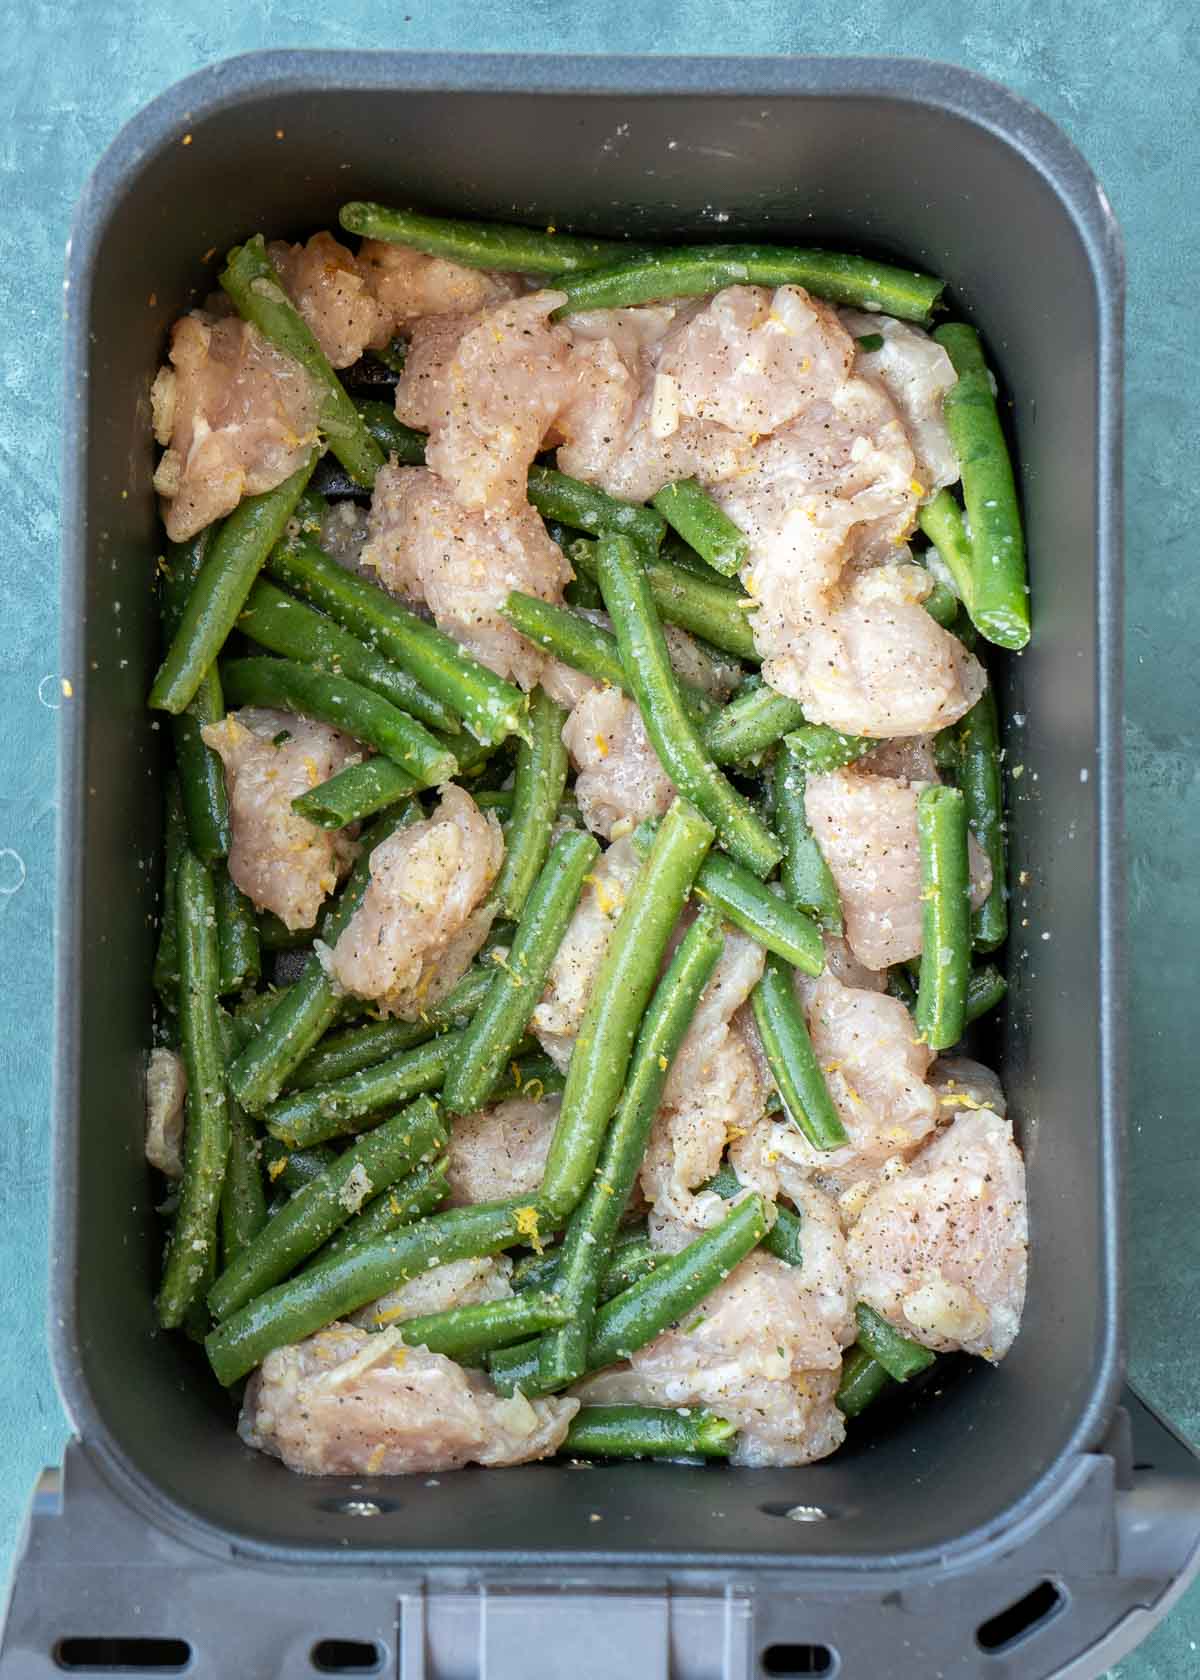 uncooked, seasoned chicken and green beans in the air fryer